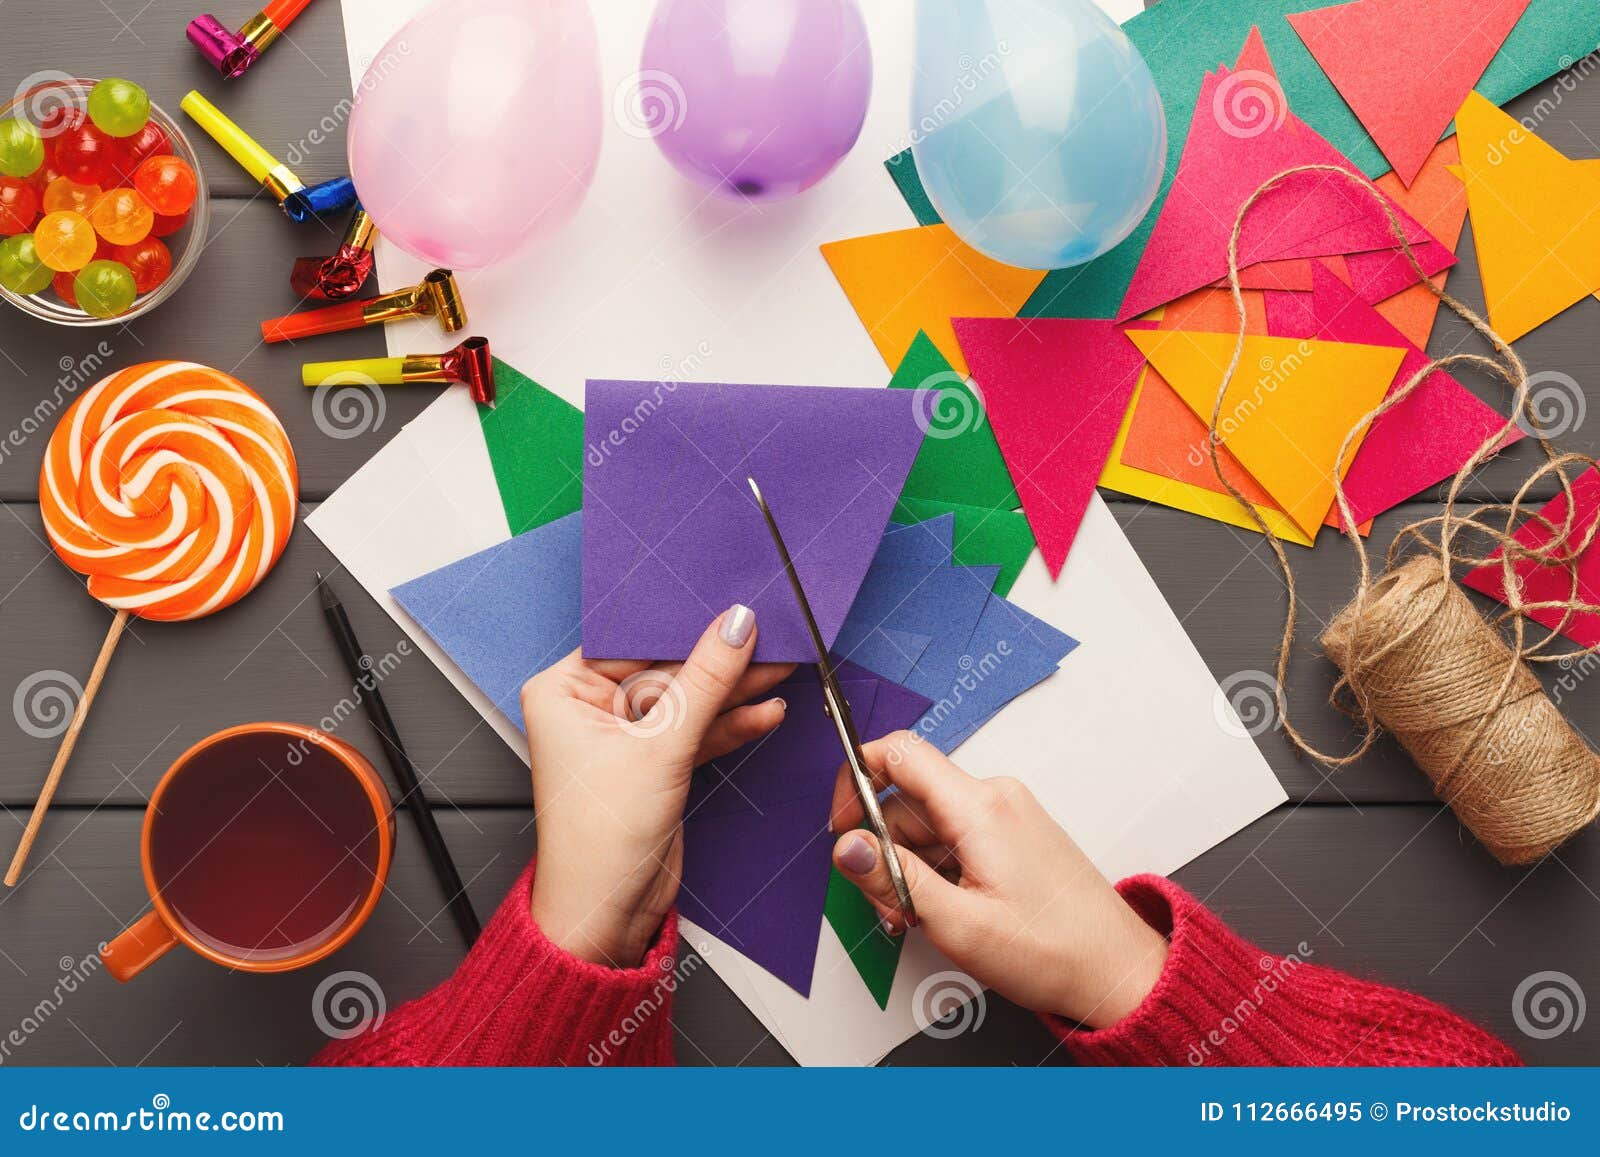 DIY Holiday Background, Birthday Party Decorations Stock Image - Image of  design, background: 112666495